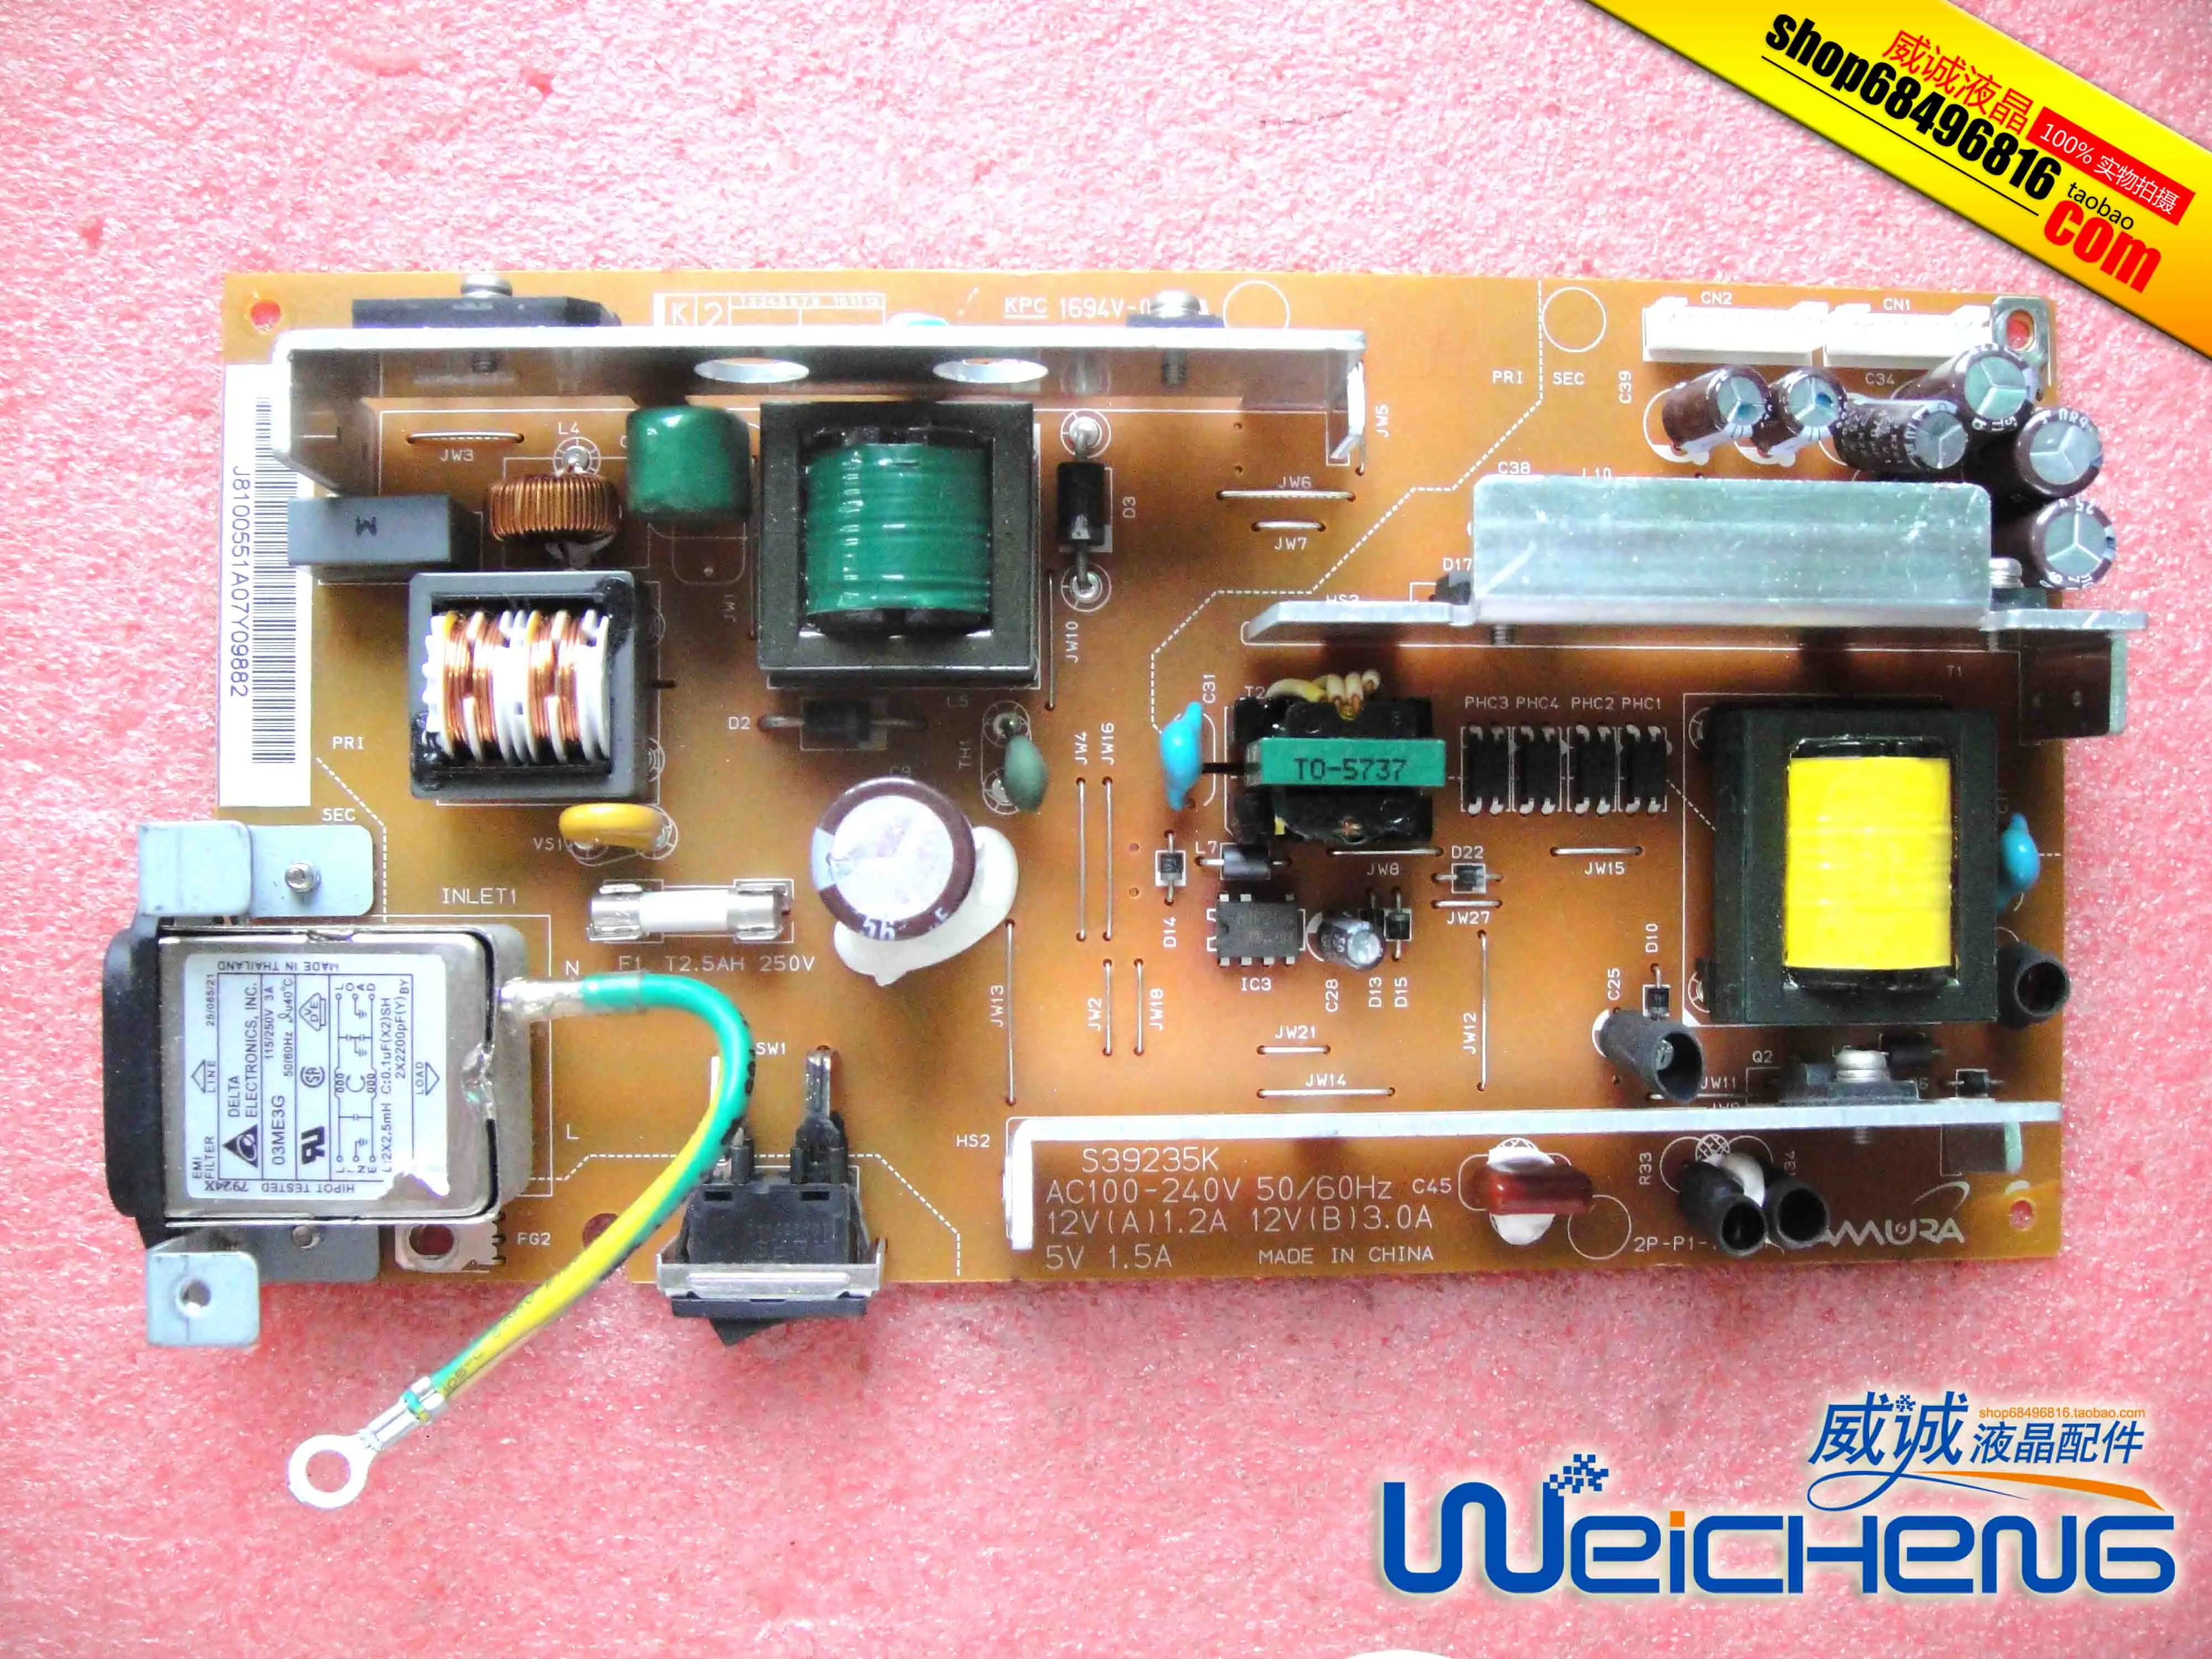 PC/タブレット ノートPC NEC Multiasync Lcd2190uxi Power Board S39235k 2p-p1-11123g High Voltage  Board